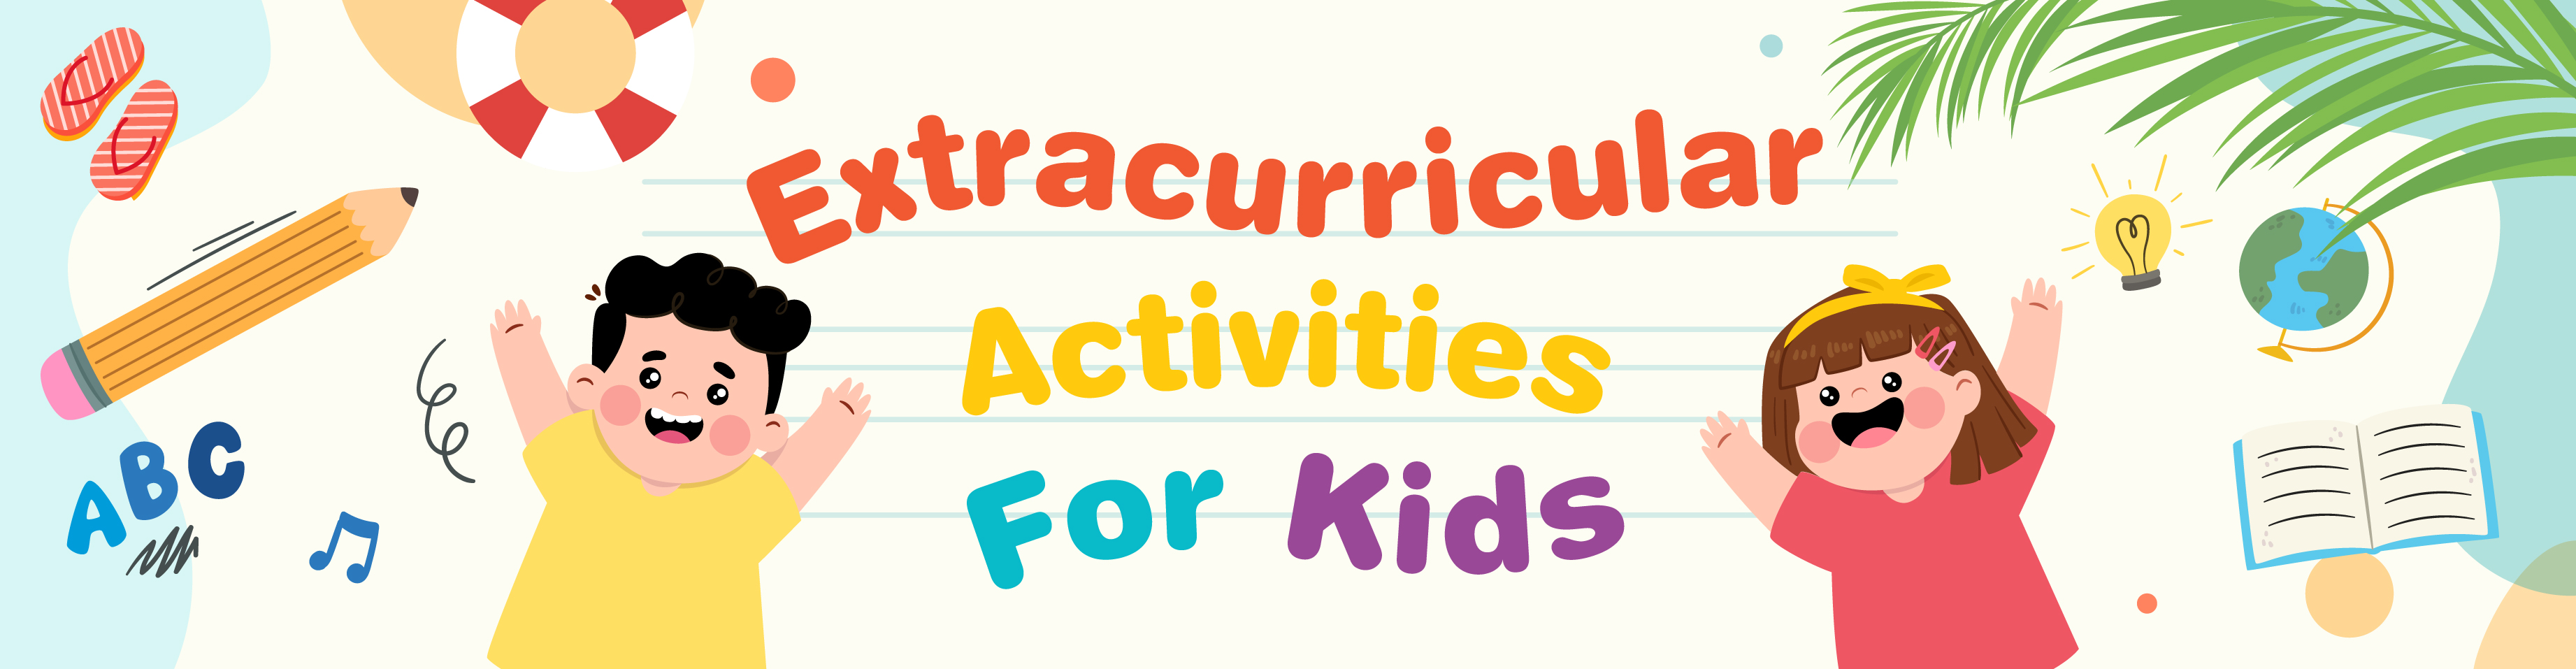 Extracurricular Activities For Kids